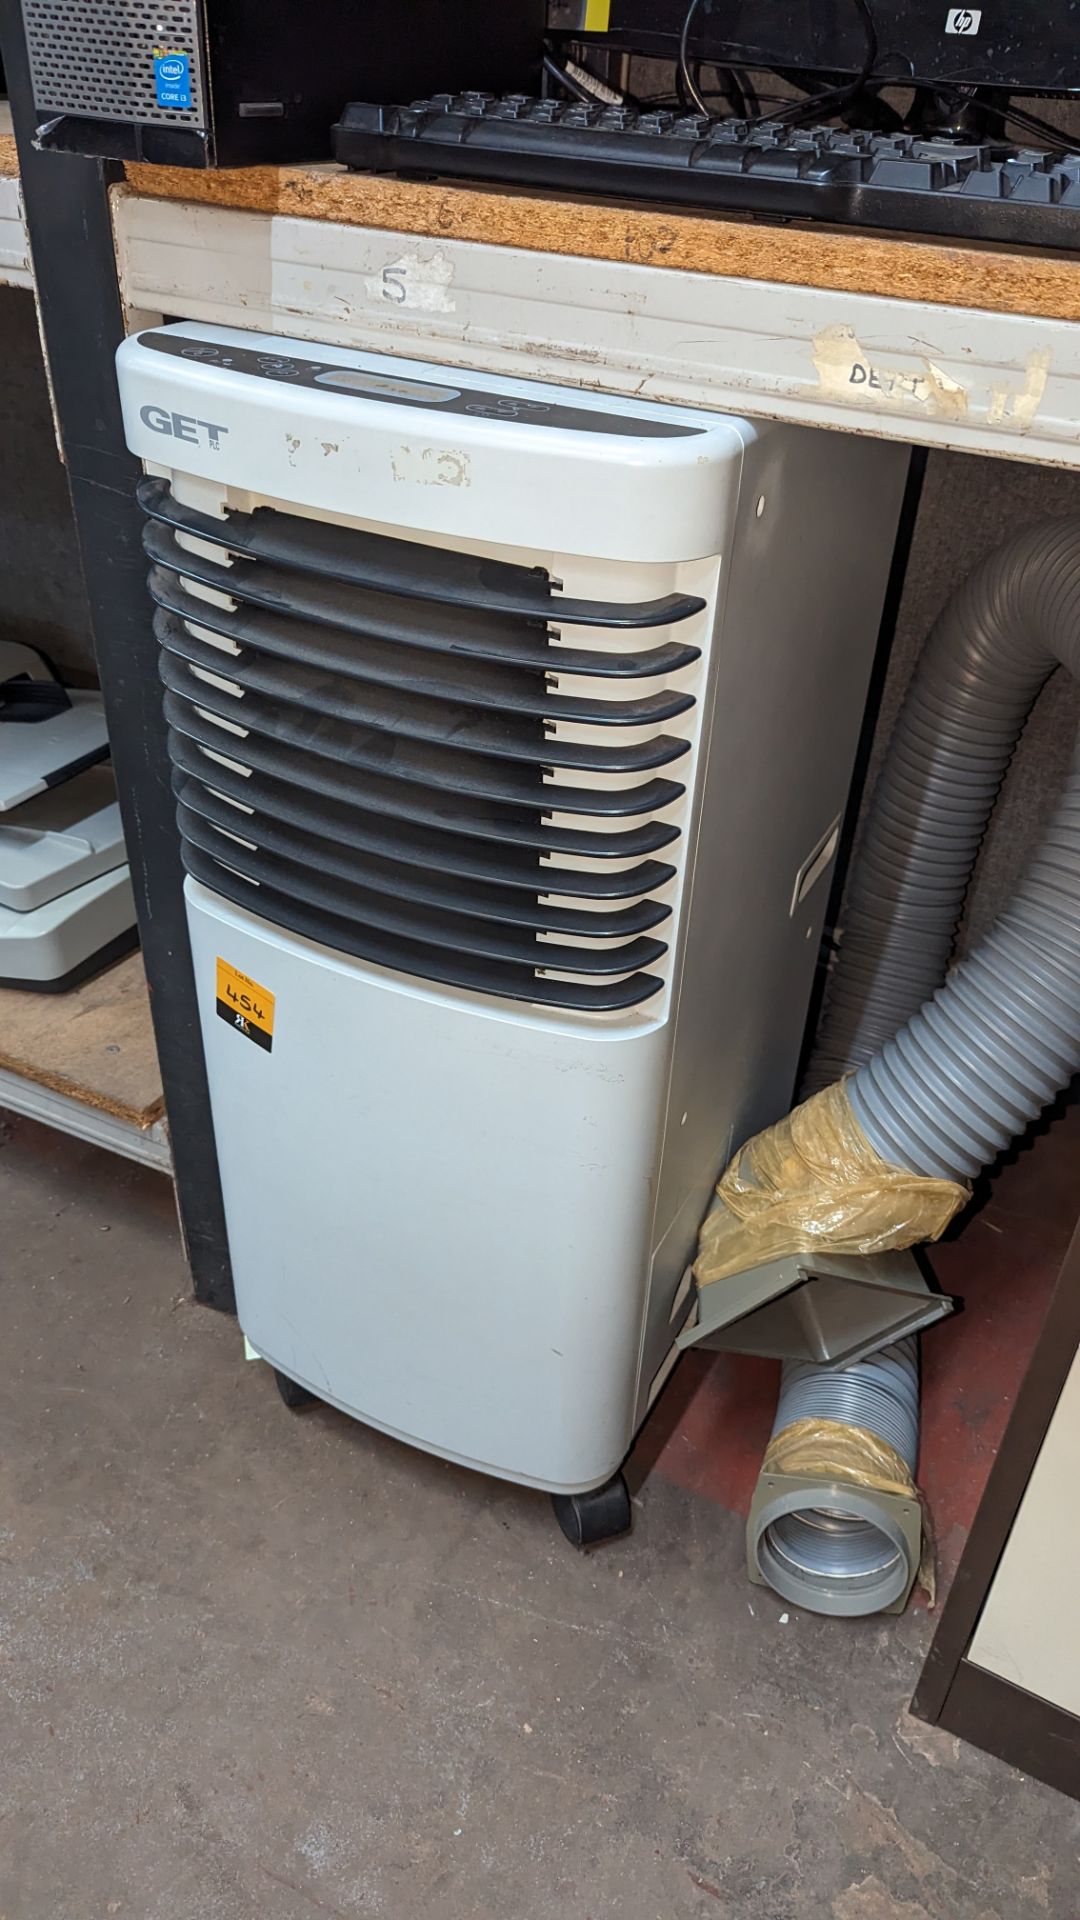 Get mobile air conditioning unit